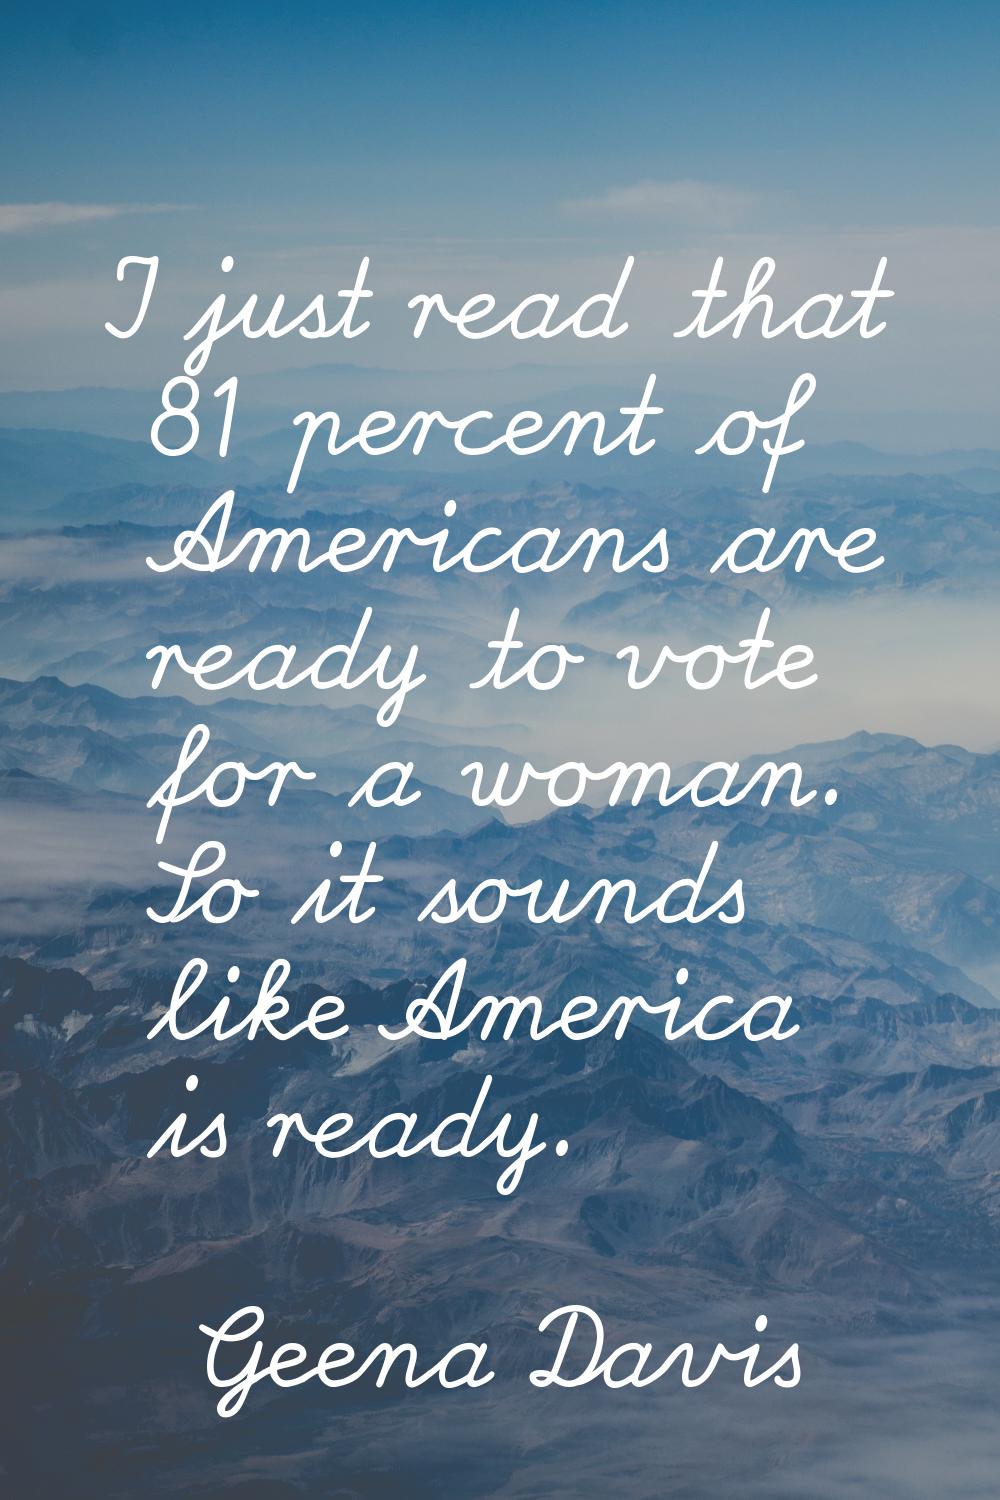 I just read that 81 percent of Americans are ready to vote for a woman. So it sounds like America i